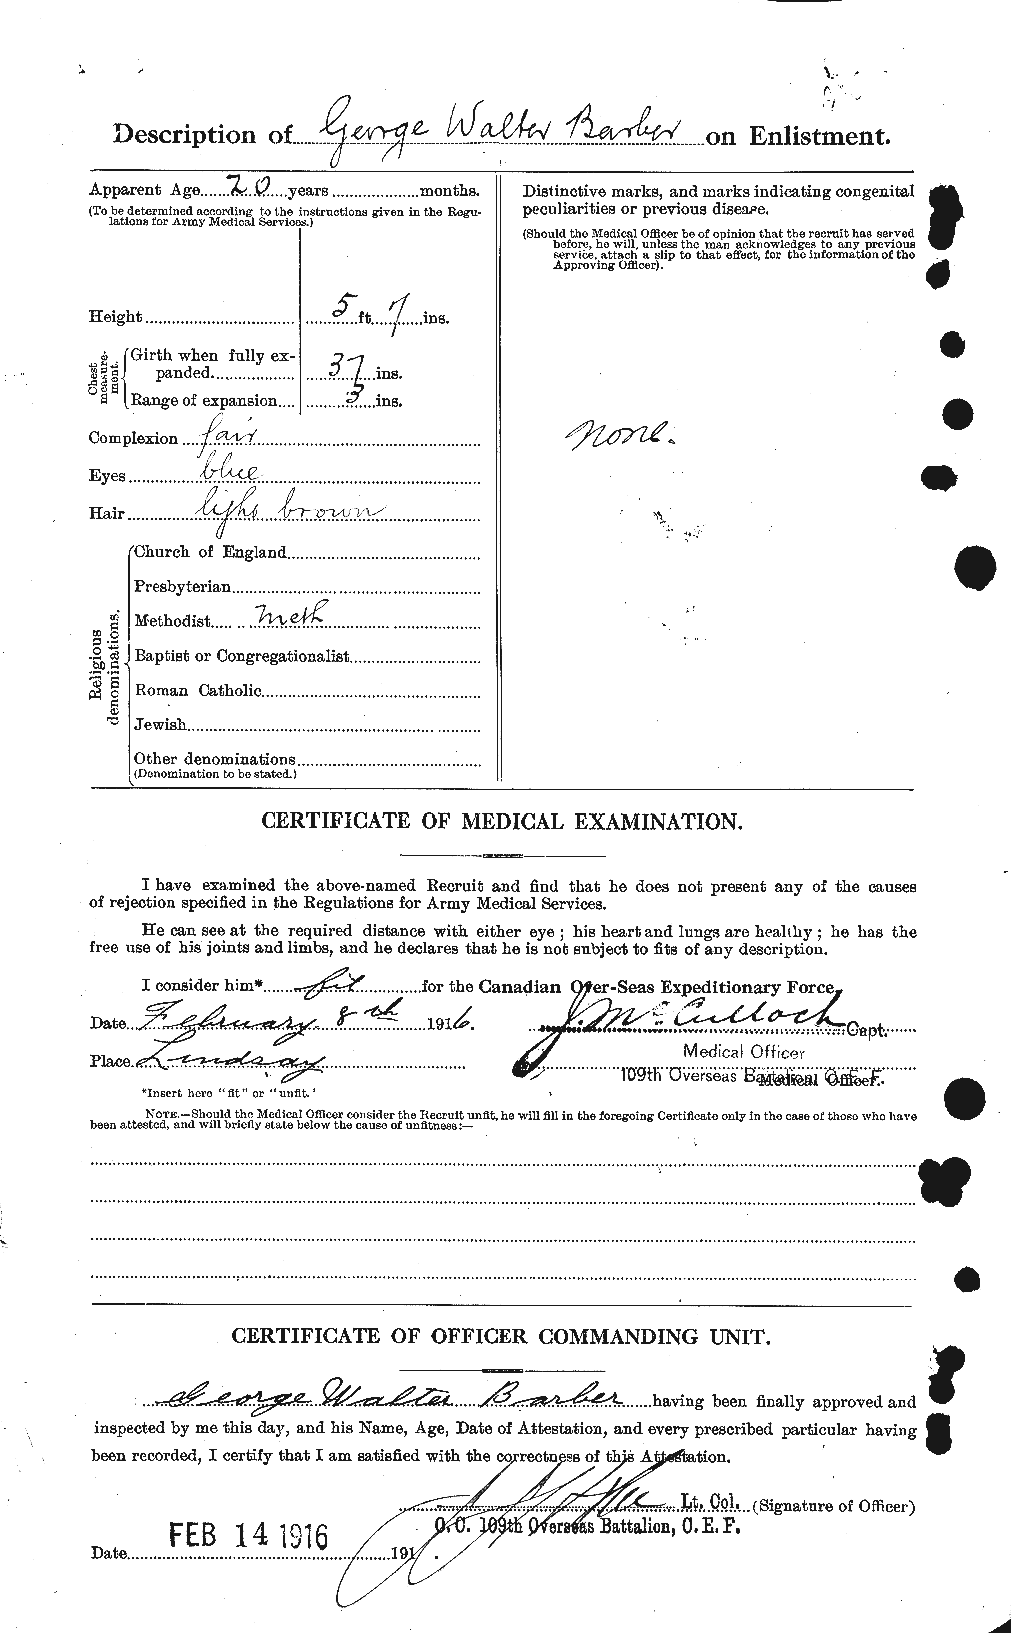 Personnel Records of the First World War - CEF 219117b